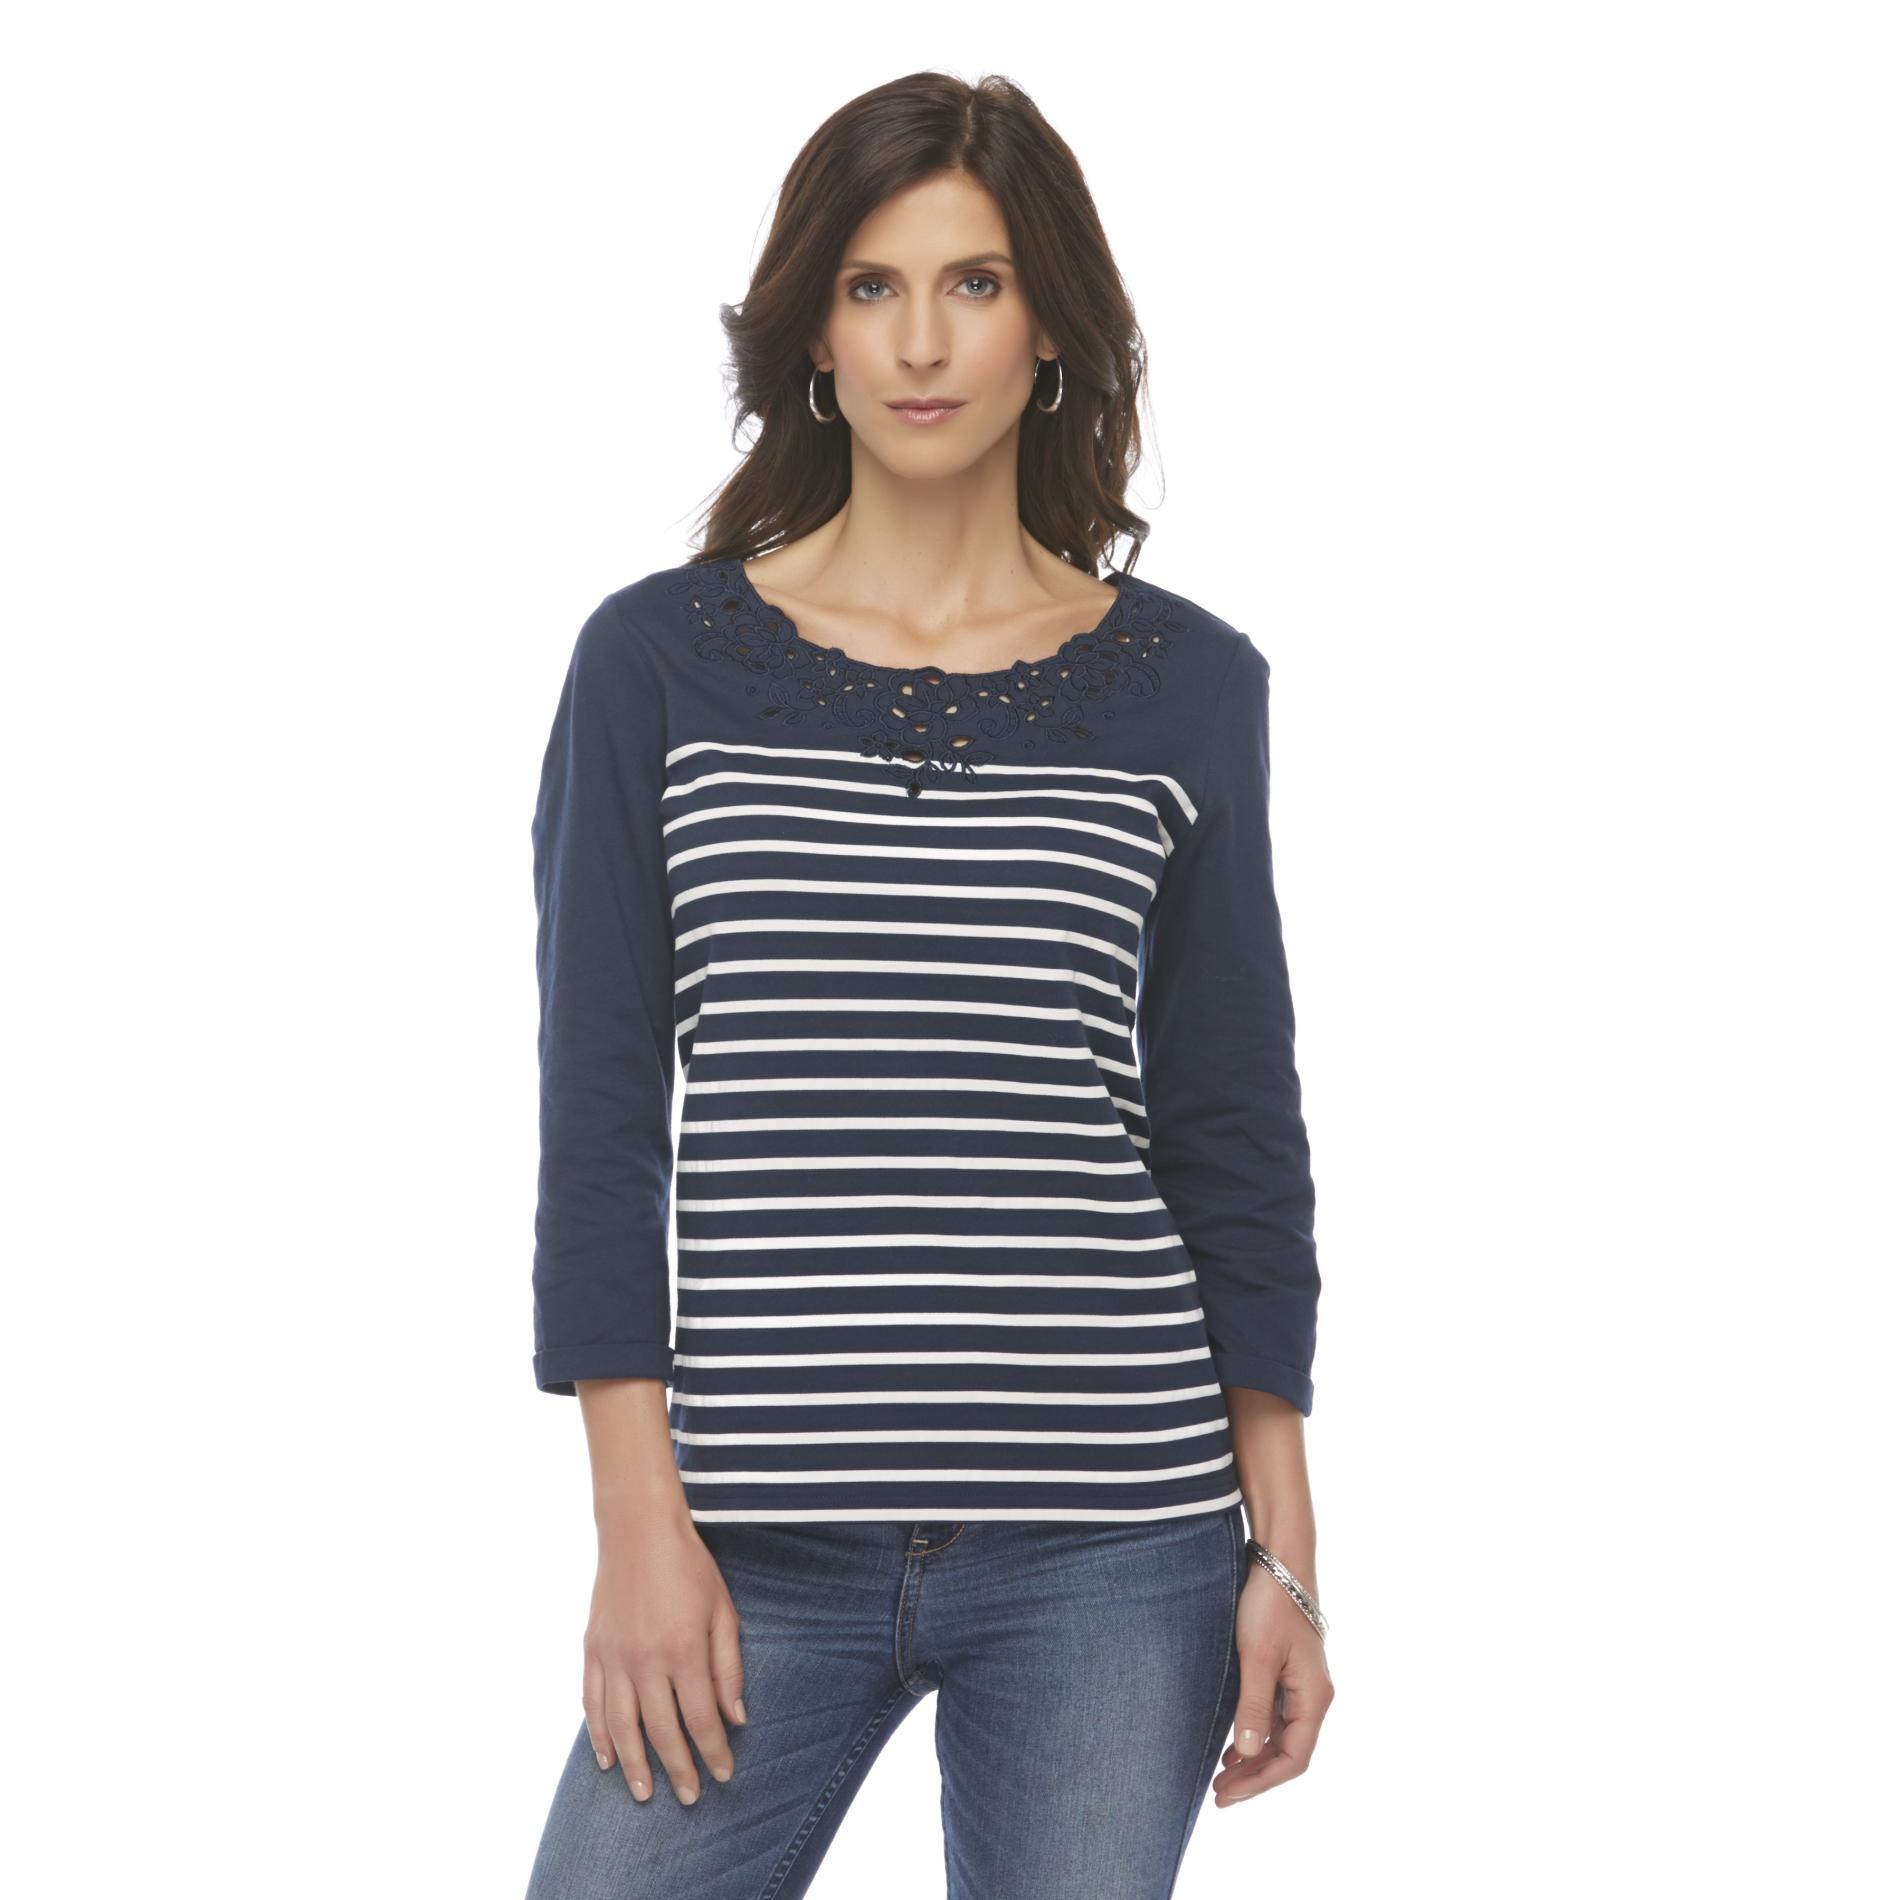 Basic Editions Women's Knit Top - Striped